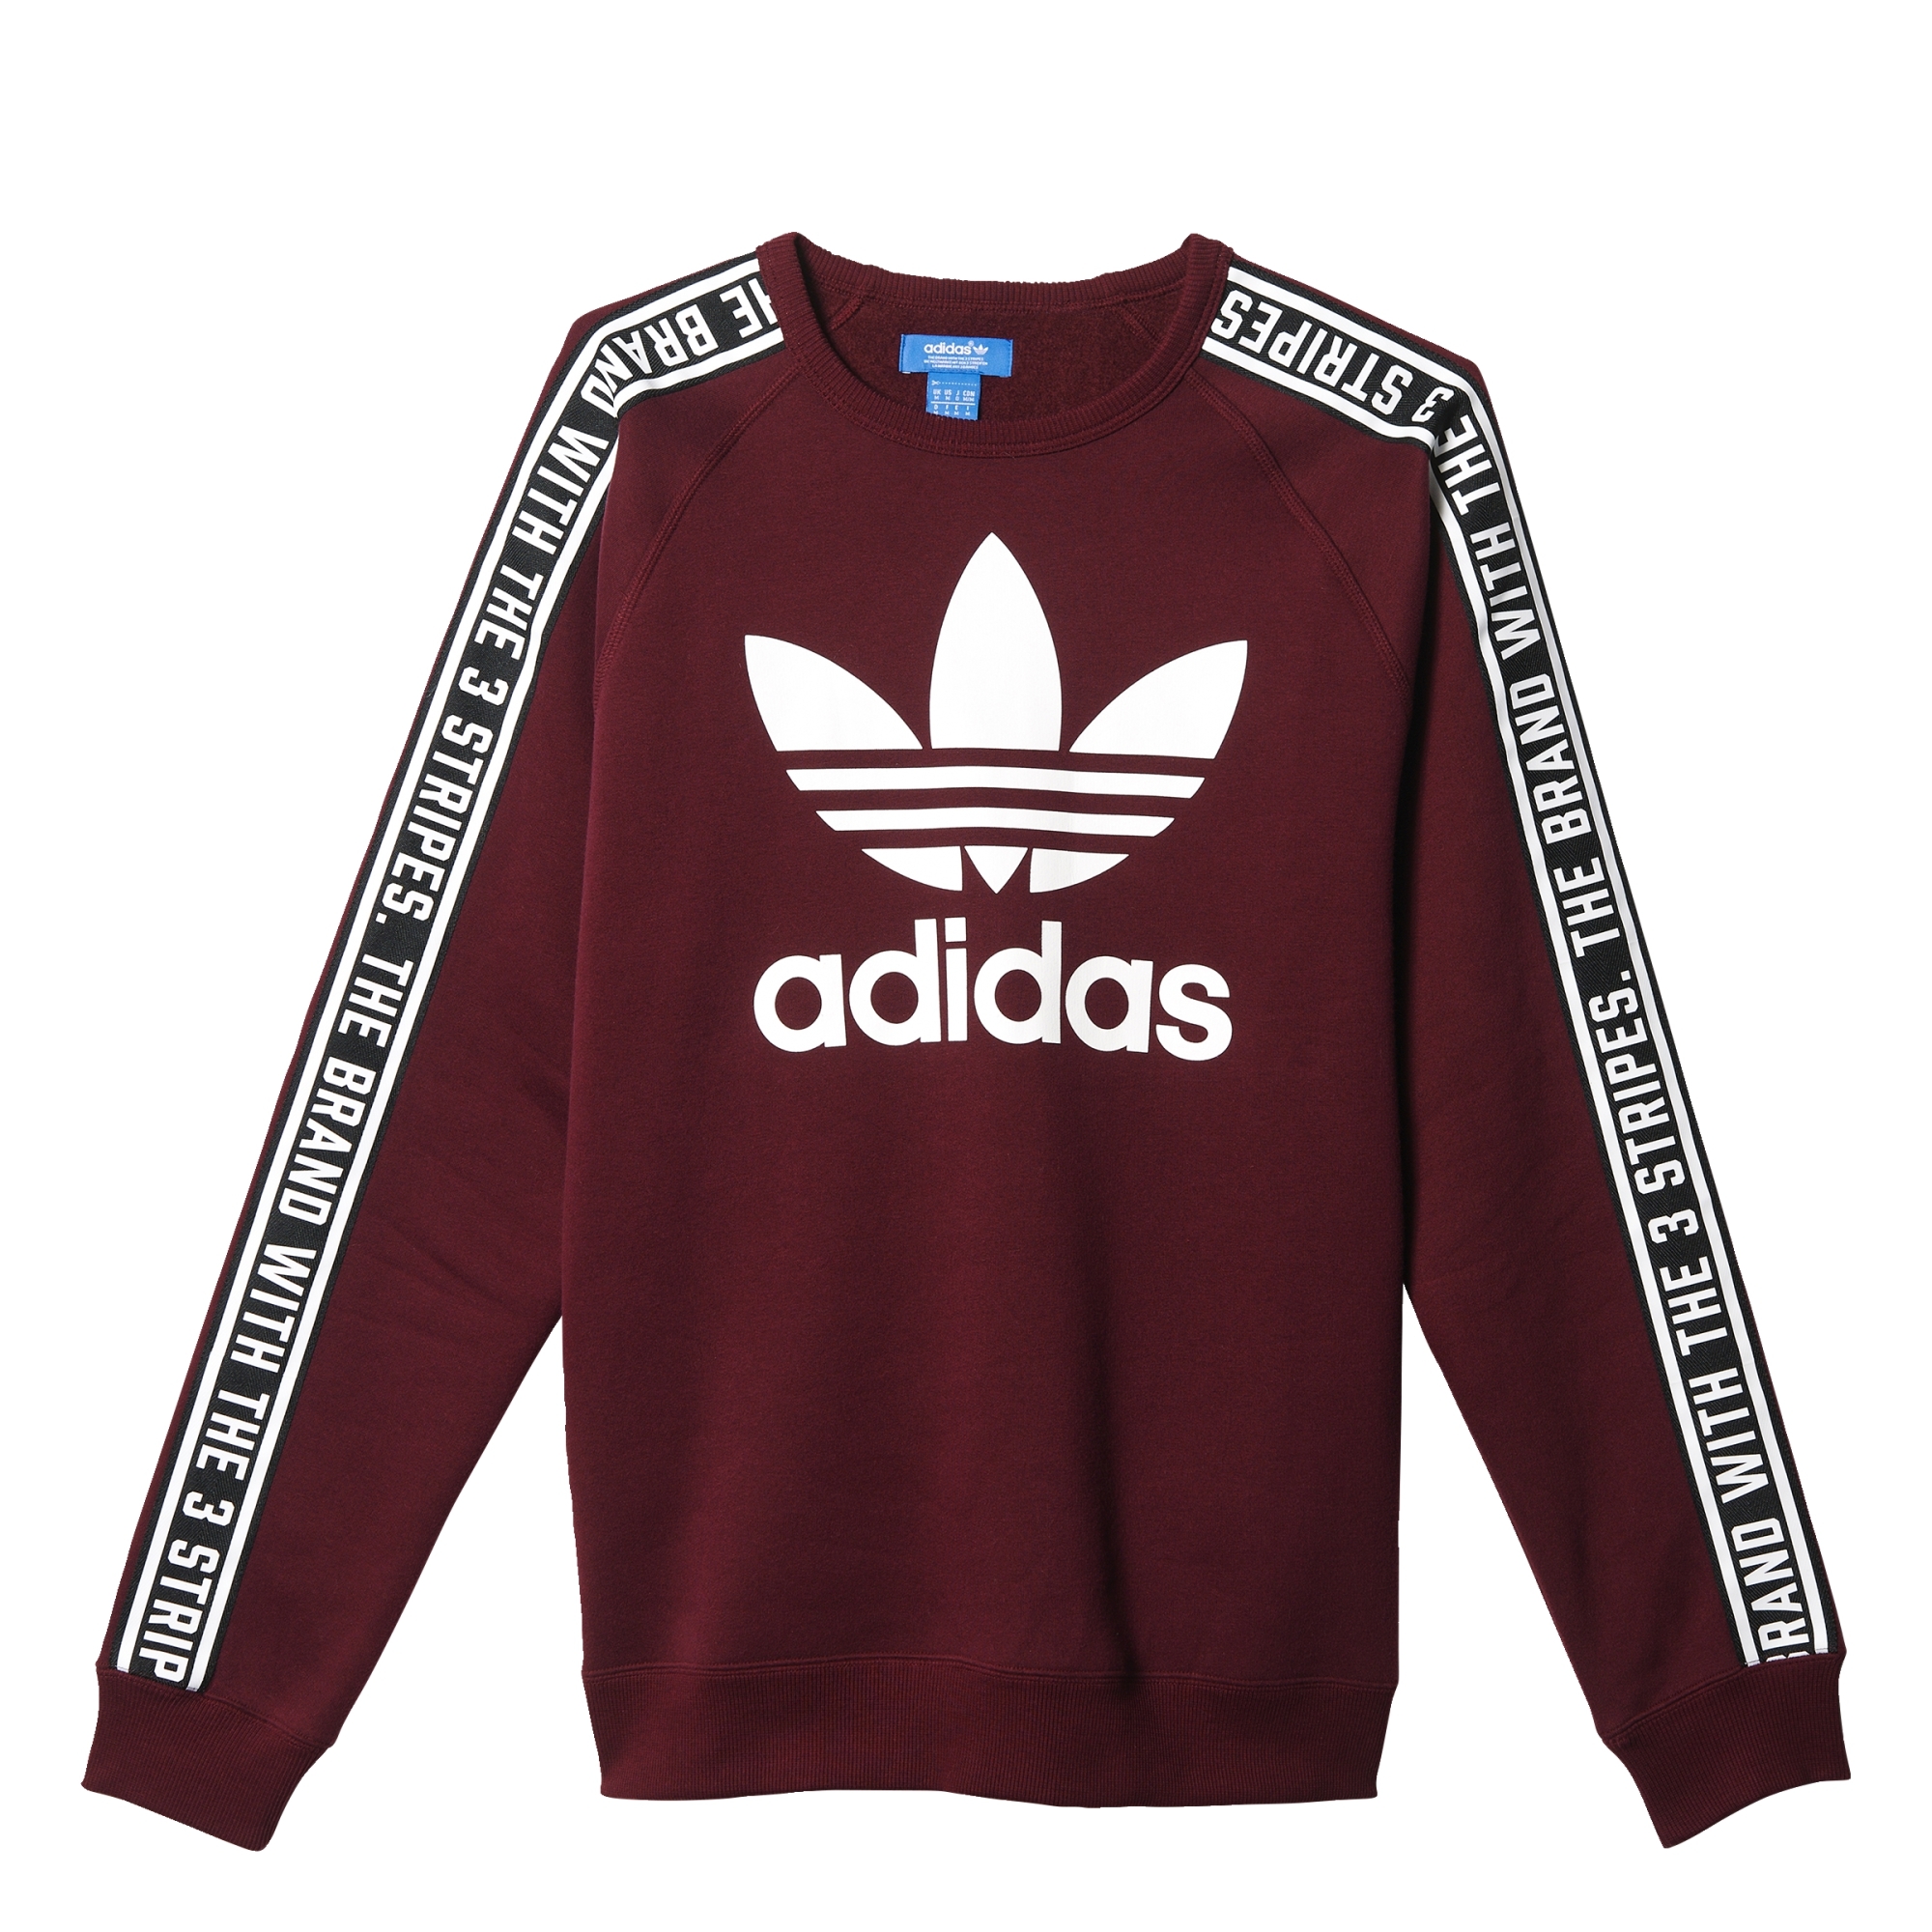 adidas shirt the brand with 3 stripes 